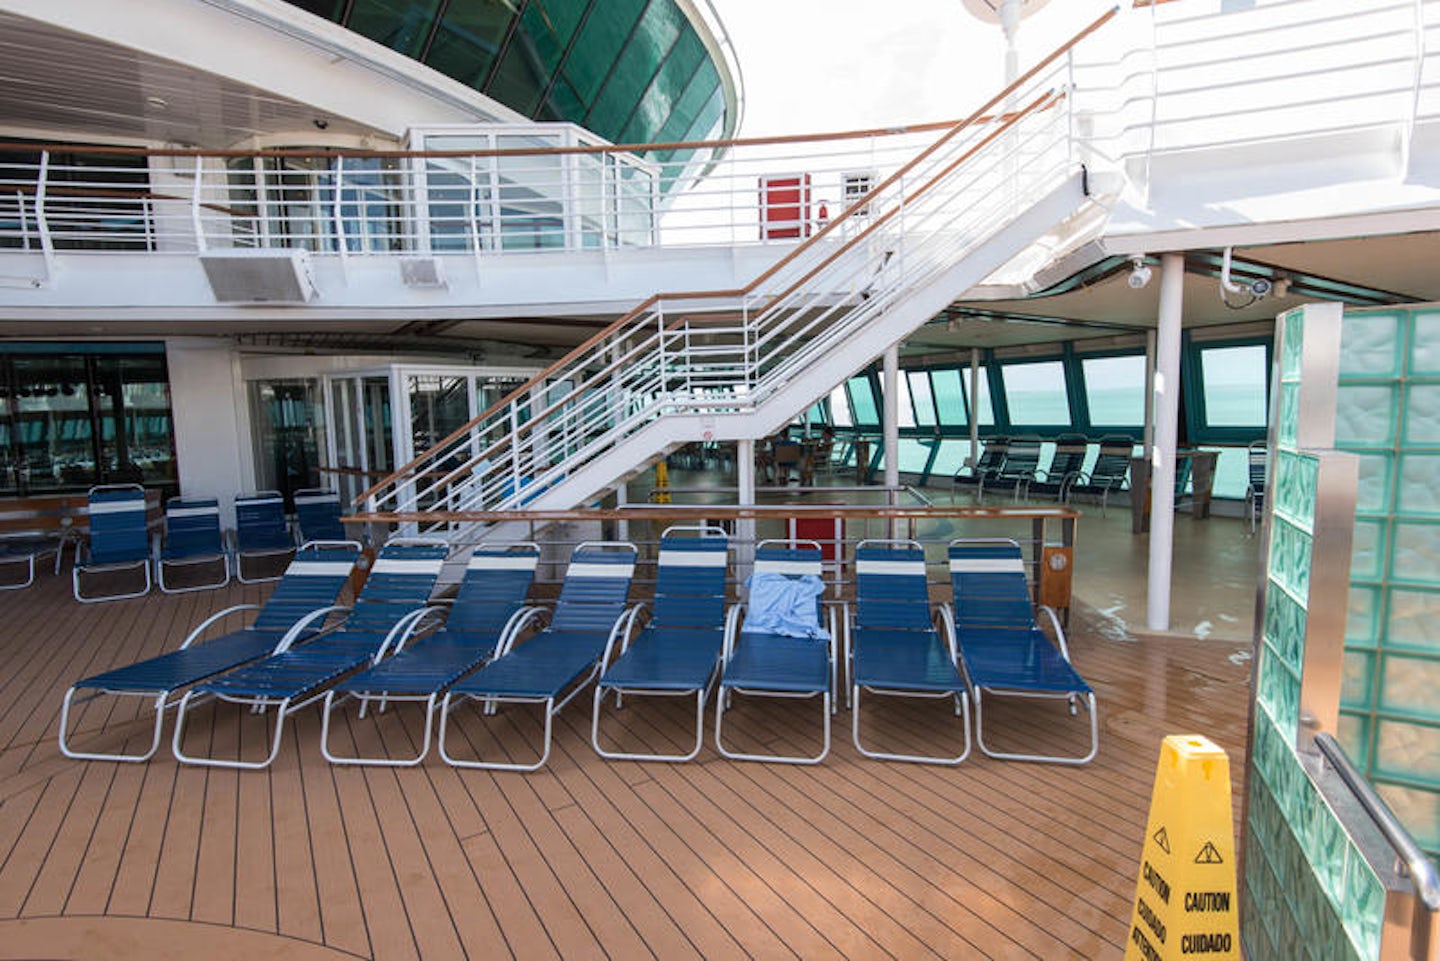 The Main Pool on Brilliance of the Seas